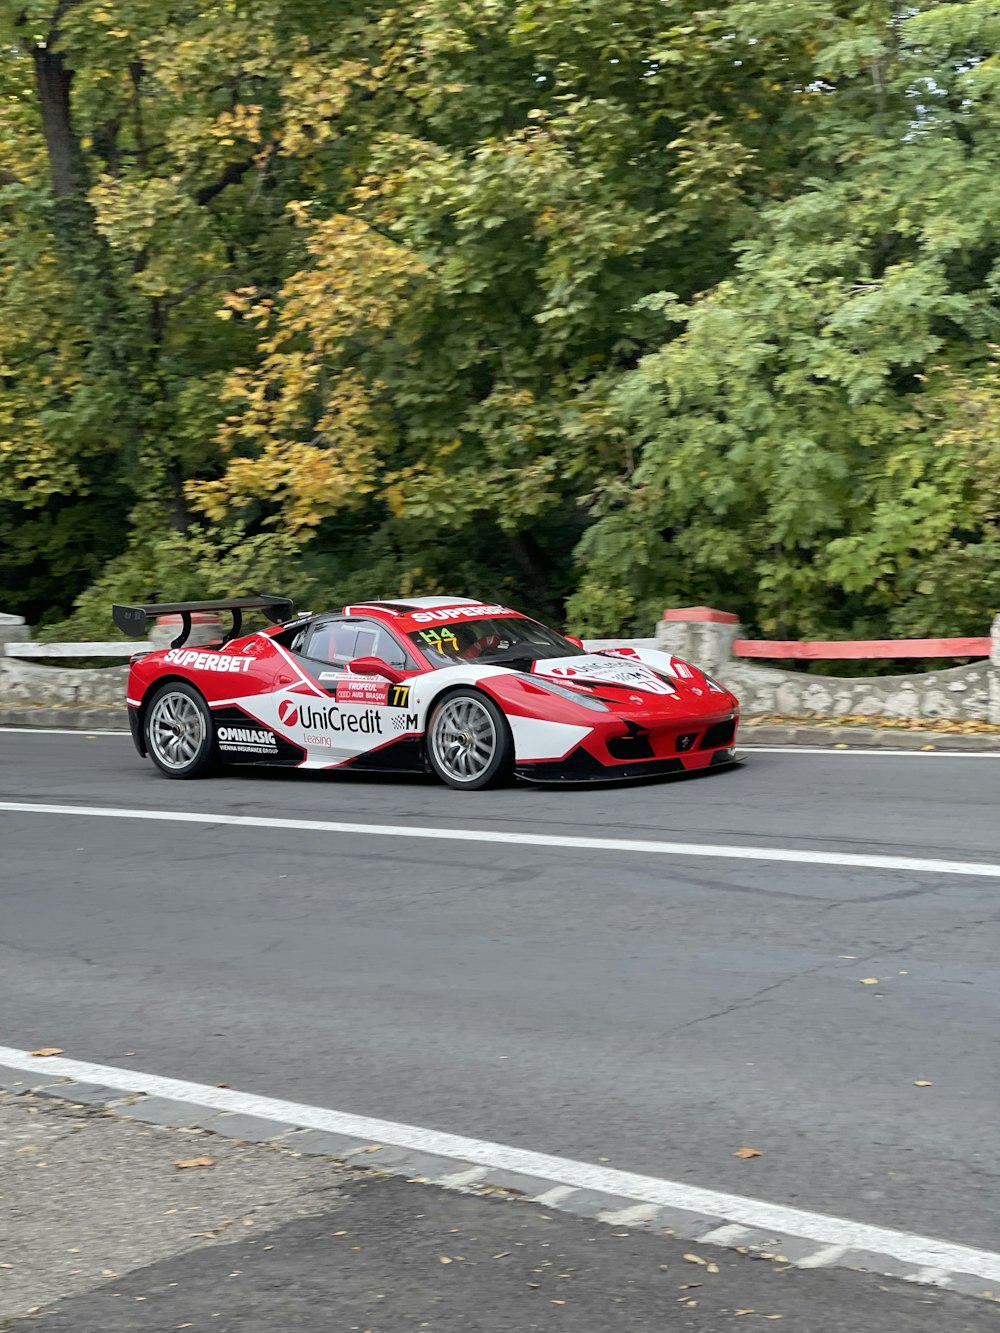 a red and white race car driving down a road